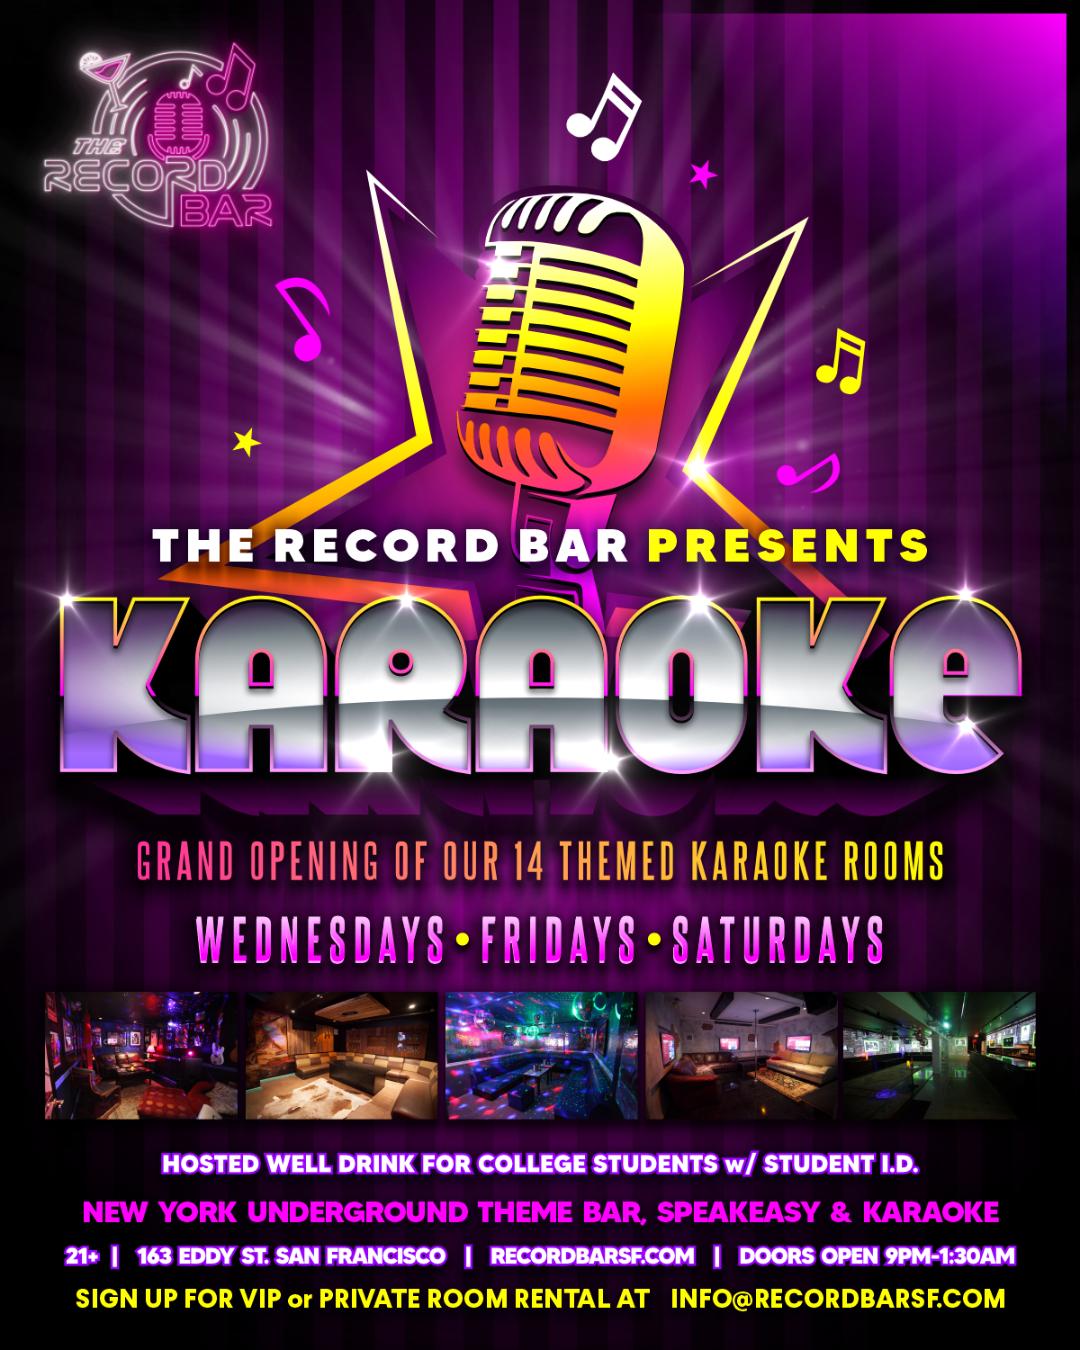 Record Bar SF - Events, Things to Do in San Francisco - DJ's, Karaoke ...